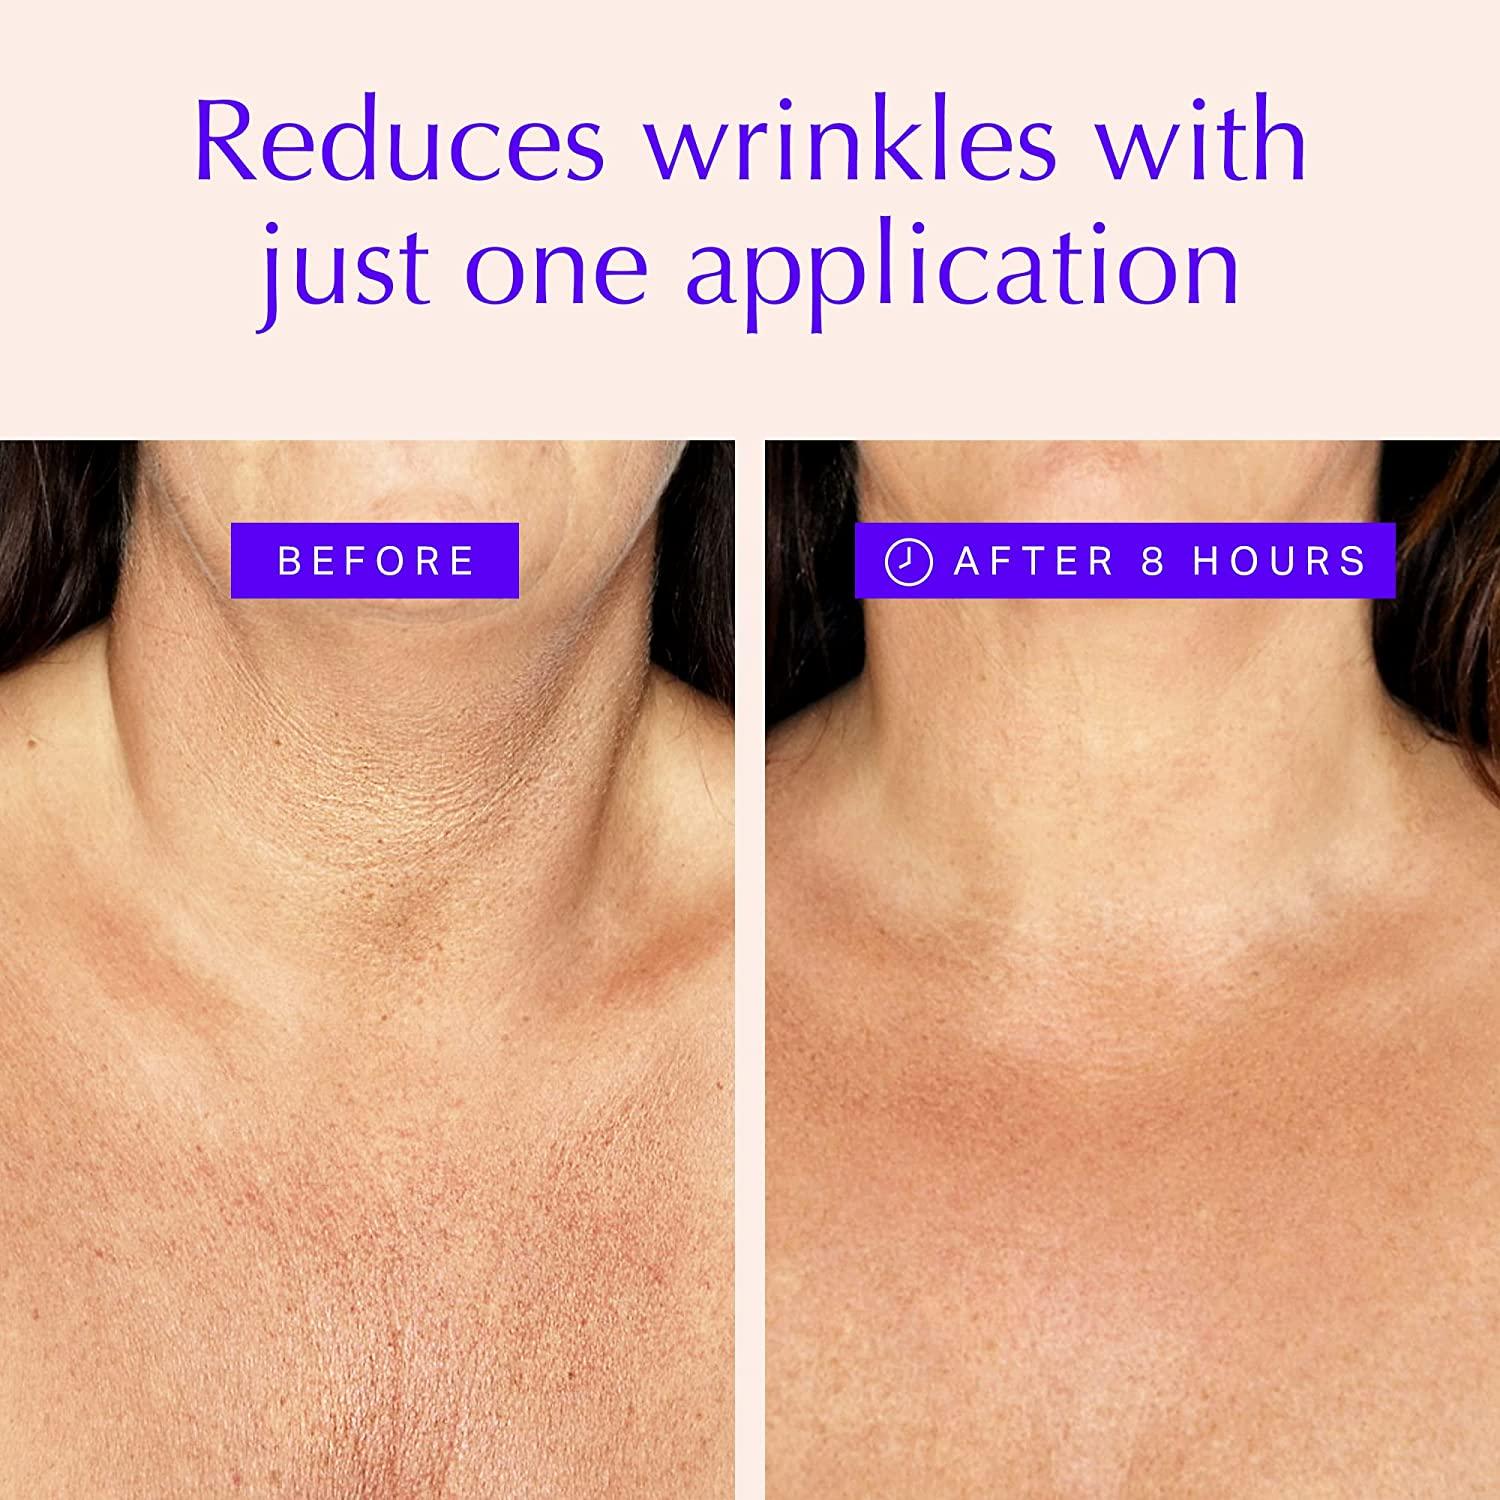 Skin tightening for the delicate neck, décolletage and bust area